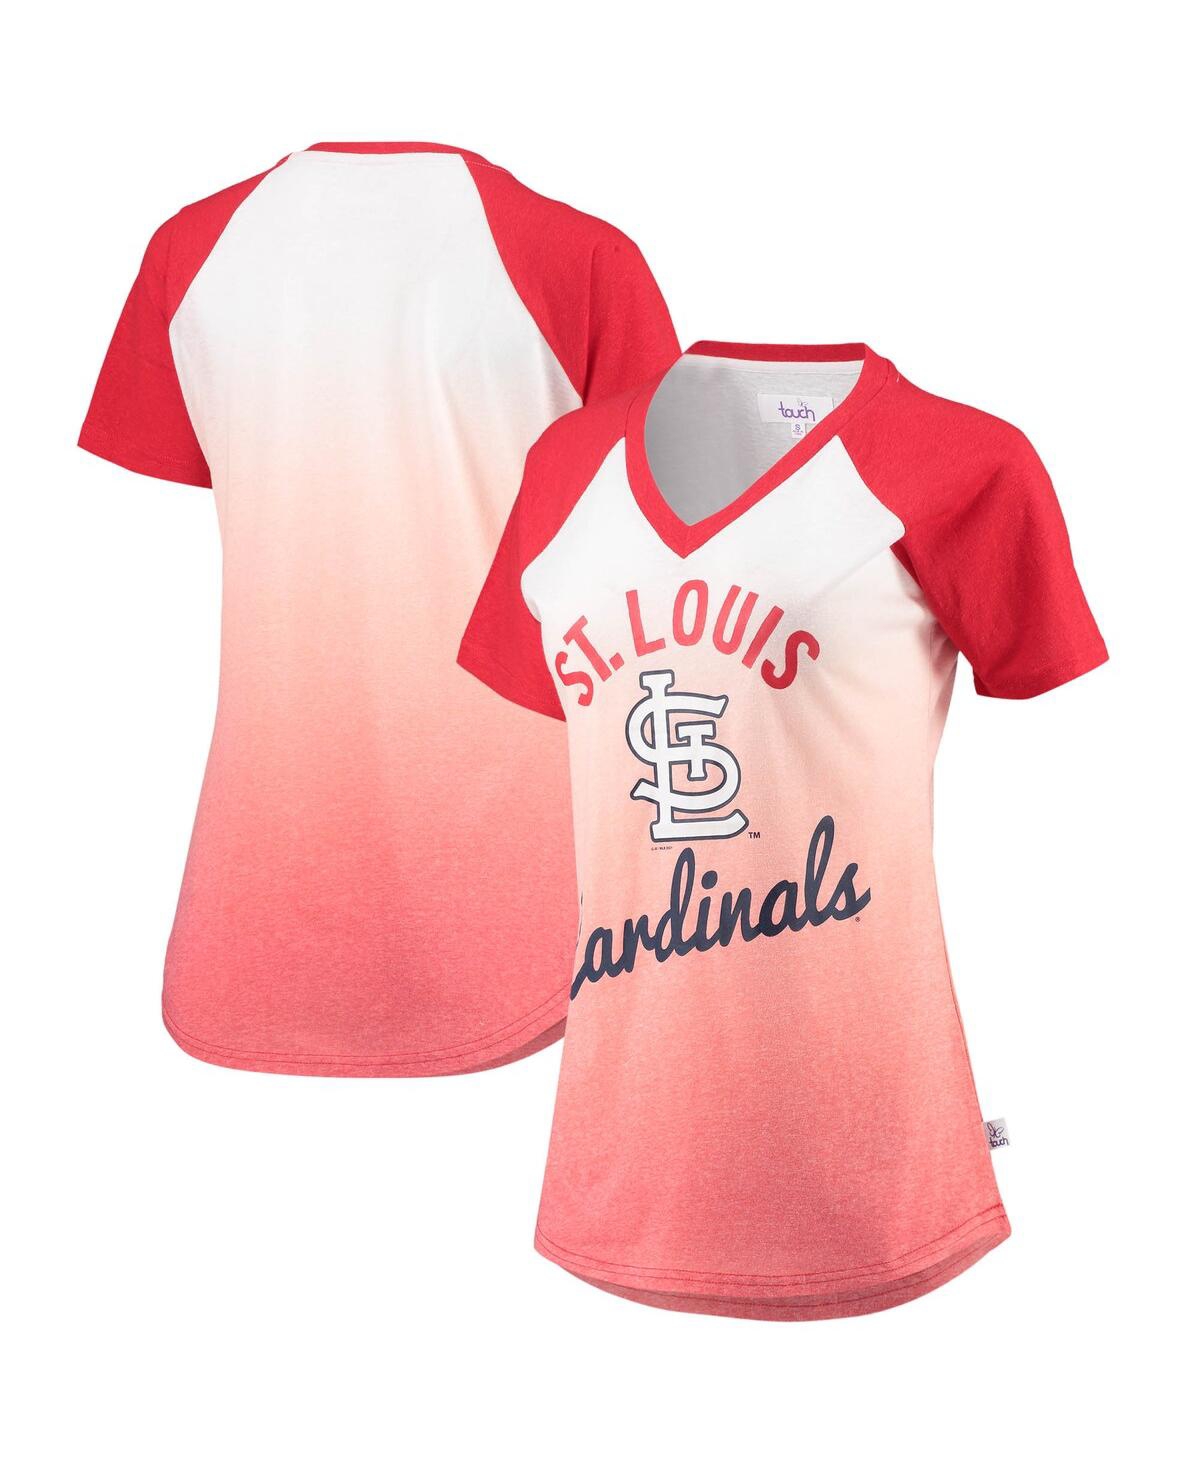 Women's Red and White St. Louis Cardinals Shortstop Ombre Raglan V-Neck T-shirt - Red, White